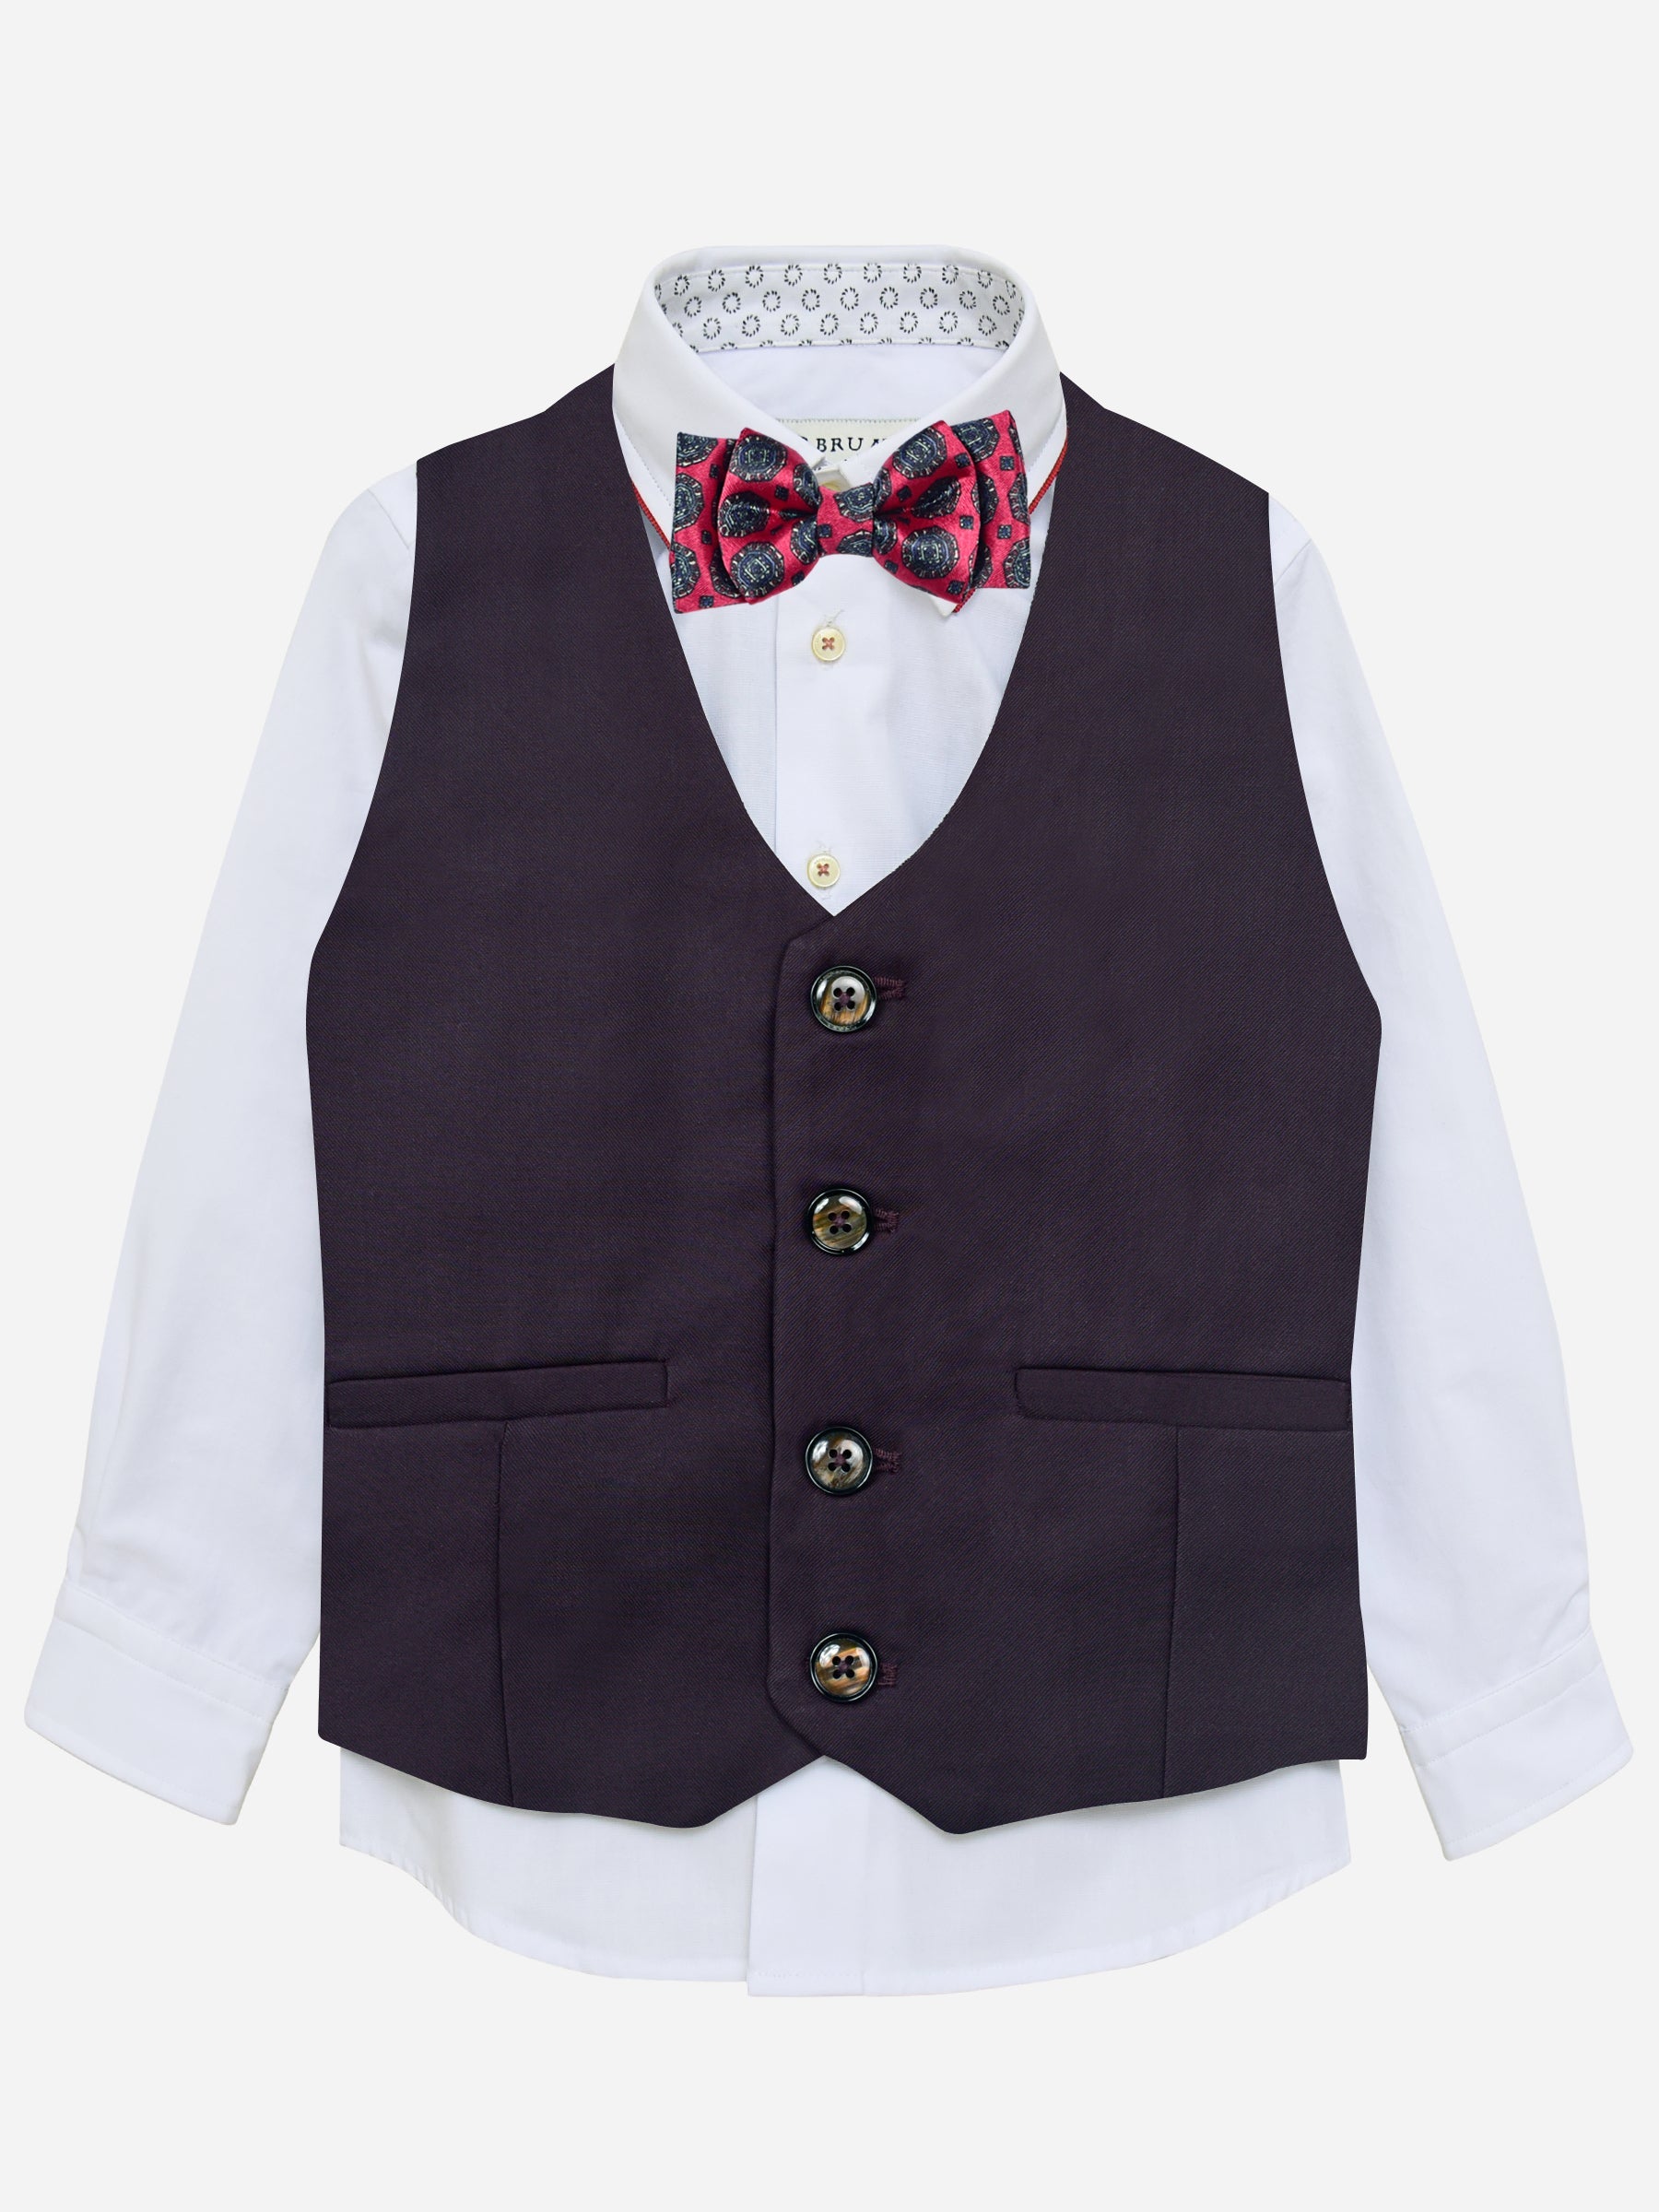 Burgundy Twill Suit Vest With Bow Brumano Pakistan